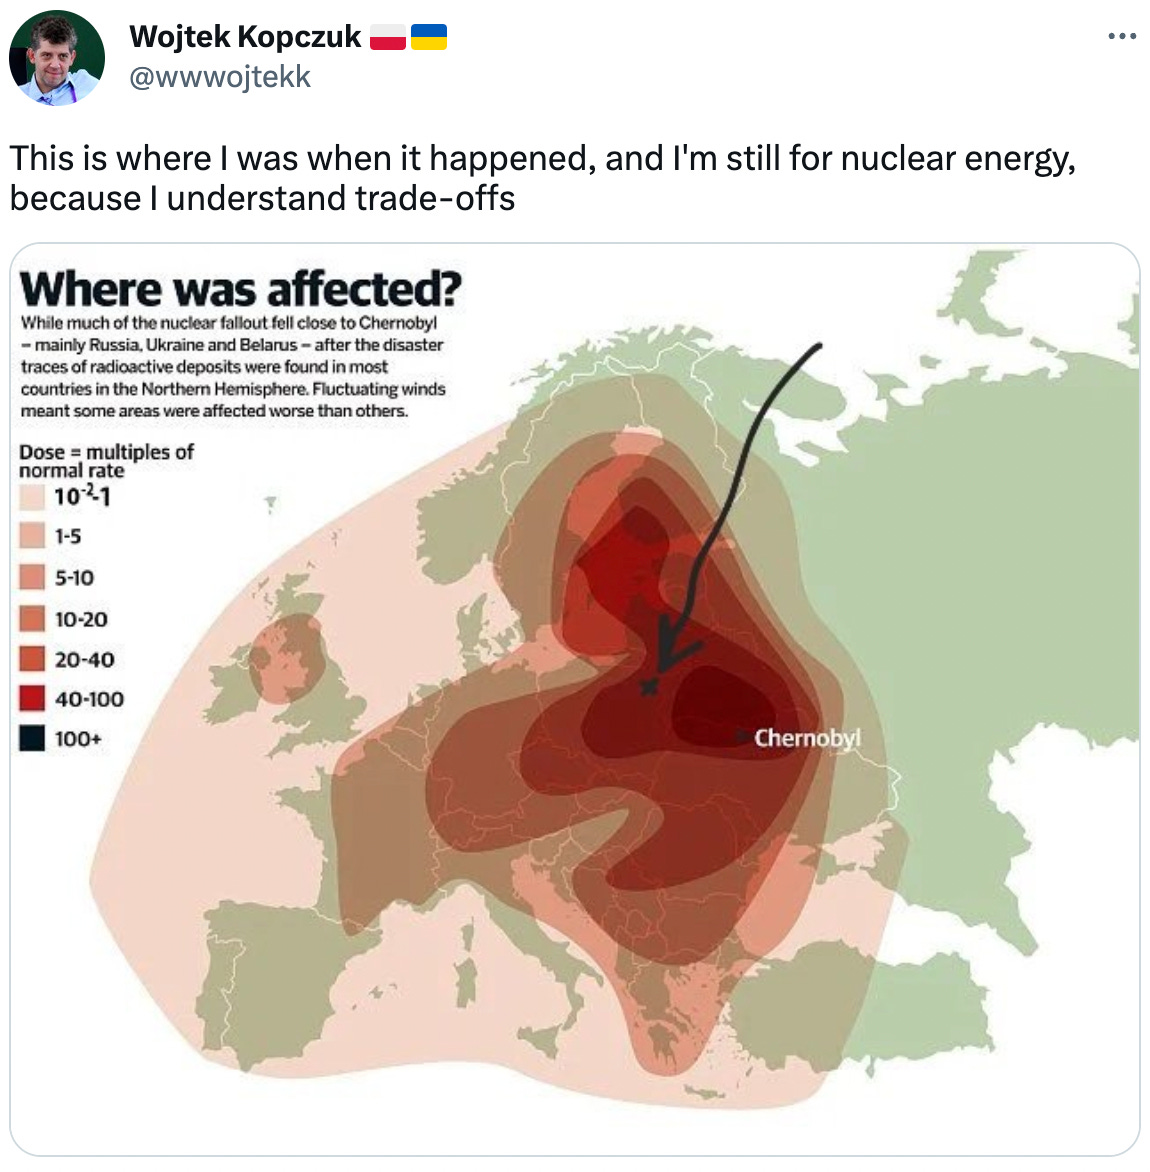 wwwojtekk	This is where I was when it happened, and I'm still for nuclear energy, because I understand trade-offs https://t.co/gLzTyRb9ds https://t.co/vM3ncSutvU